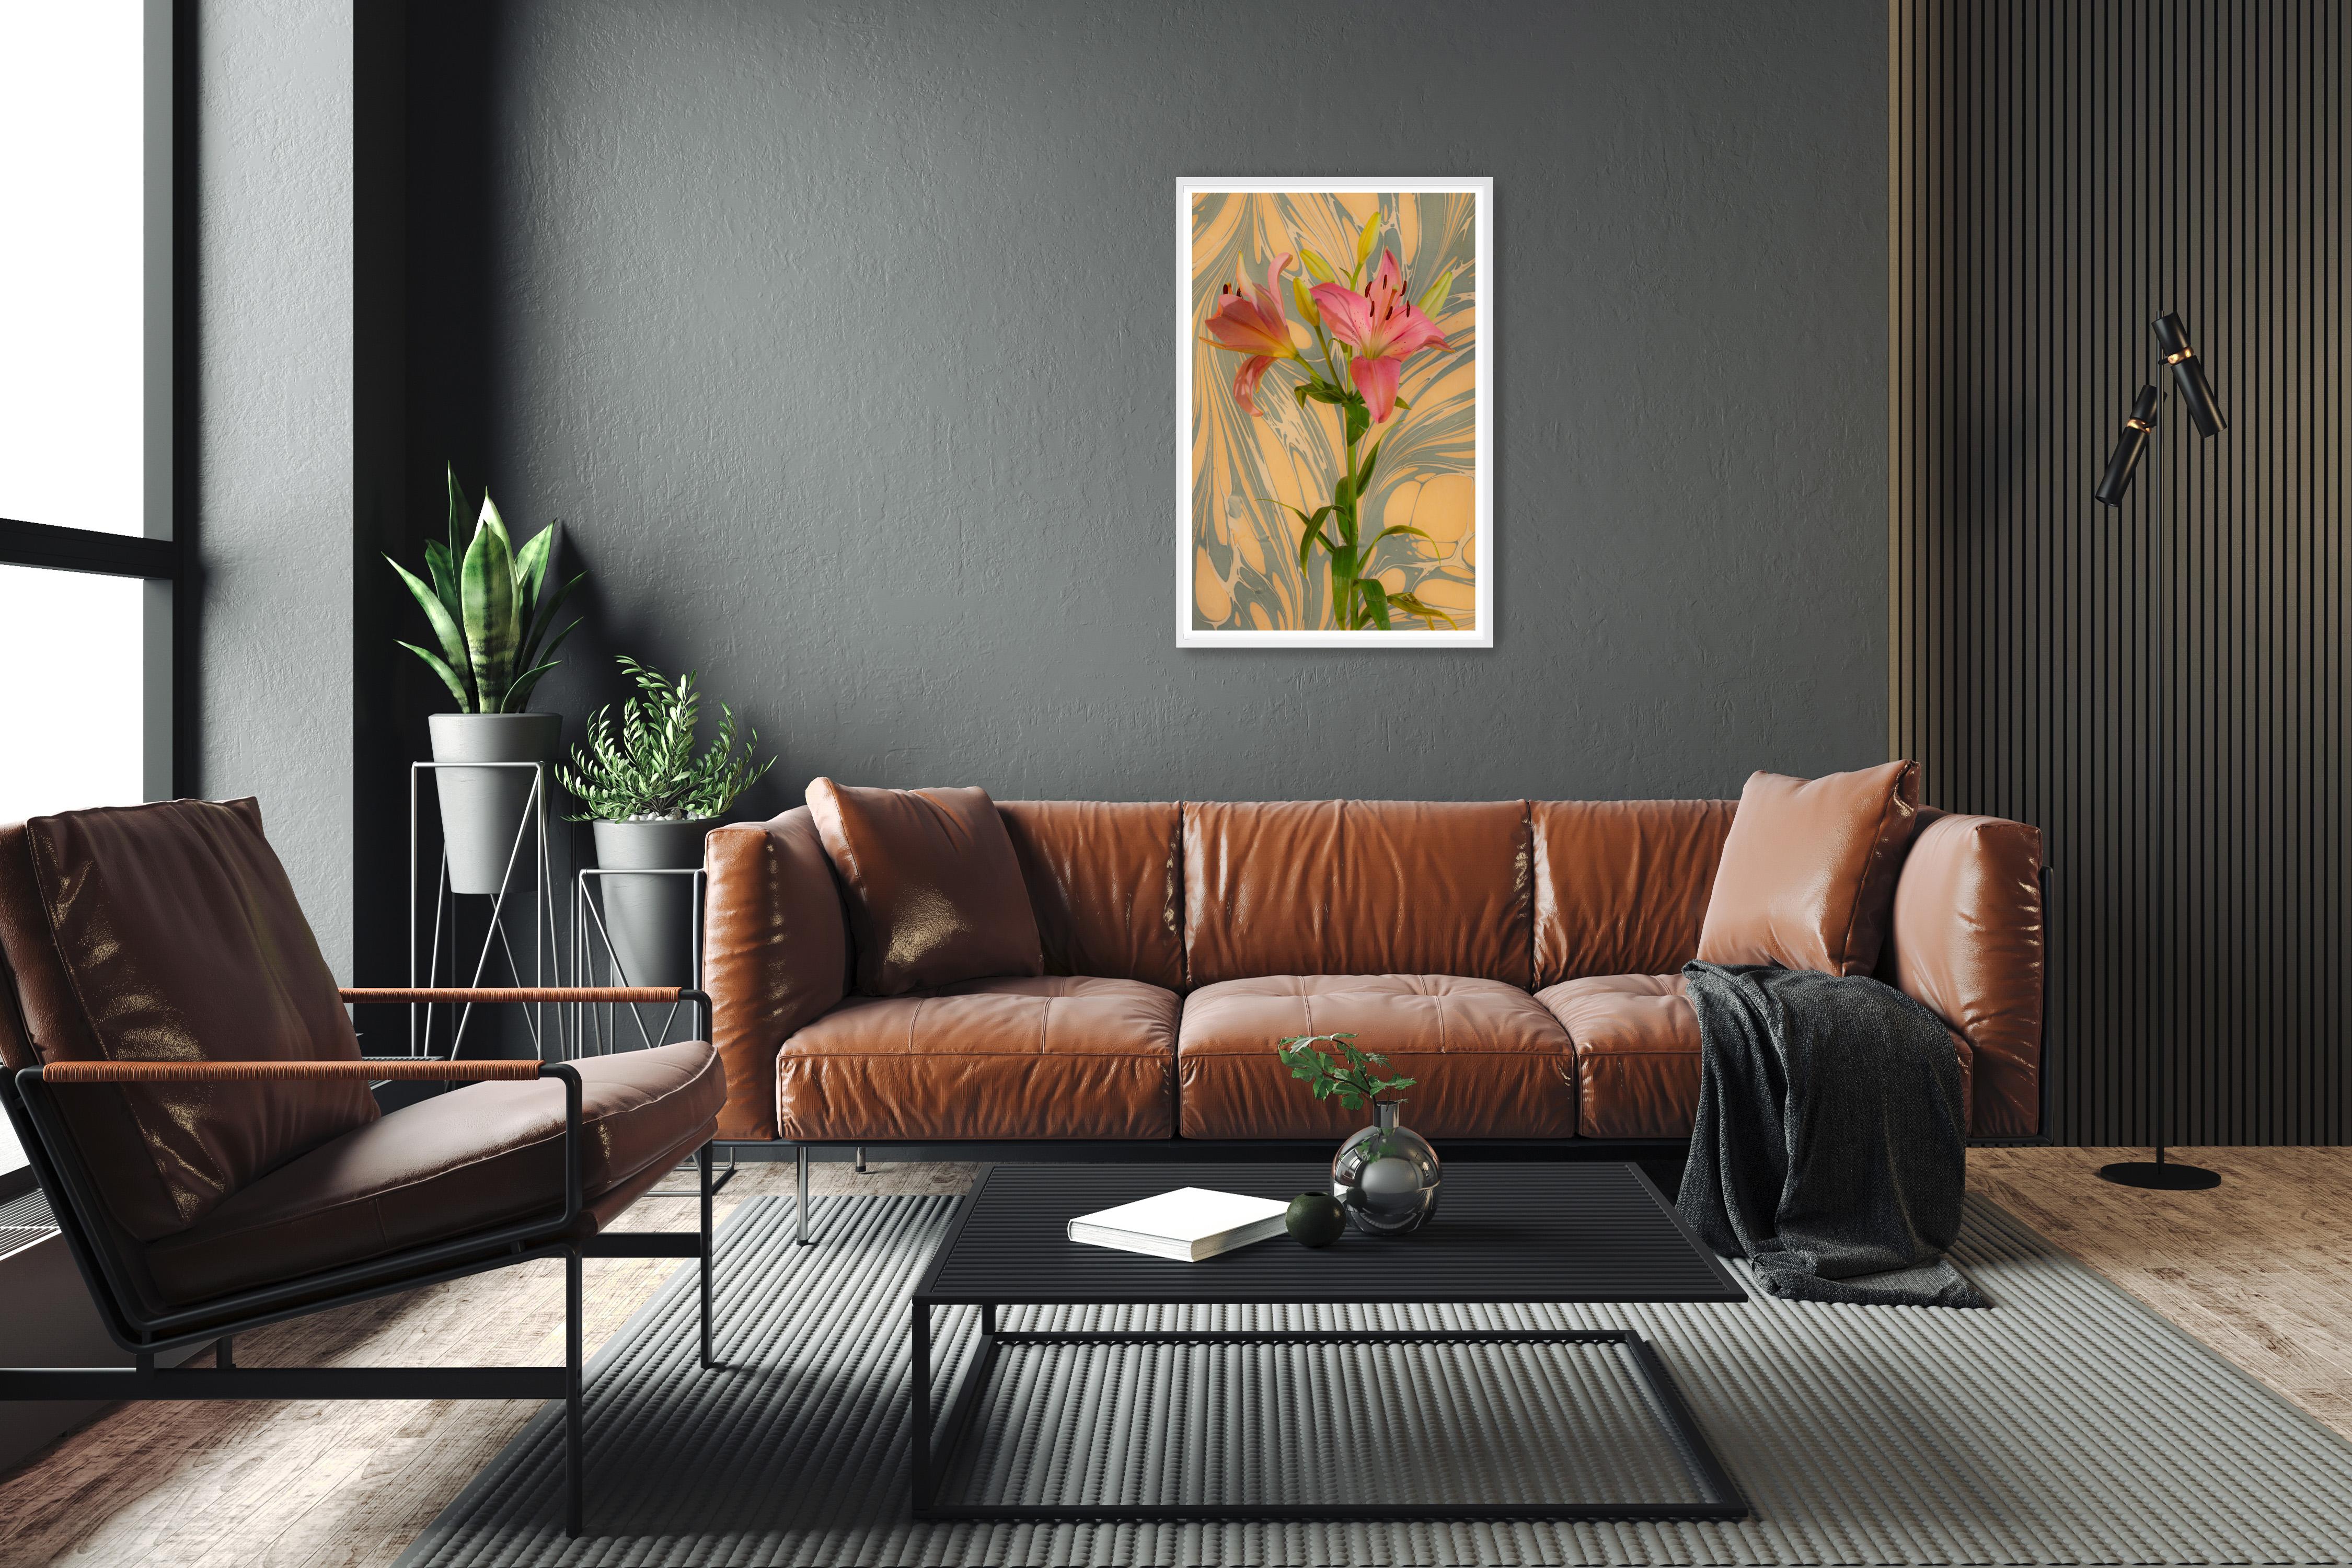 Seventies Psychedelic Flowers, Pink Lilys Bouquet, Modern Still Life, Giclée  - Realist Print by Kind of Cyan